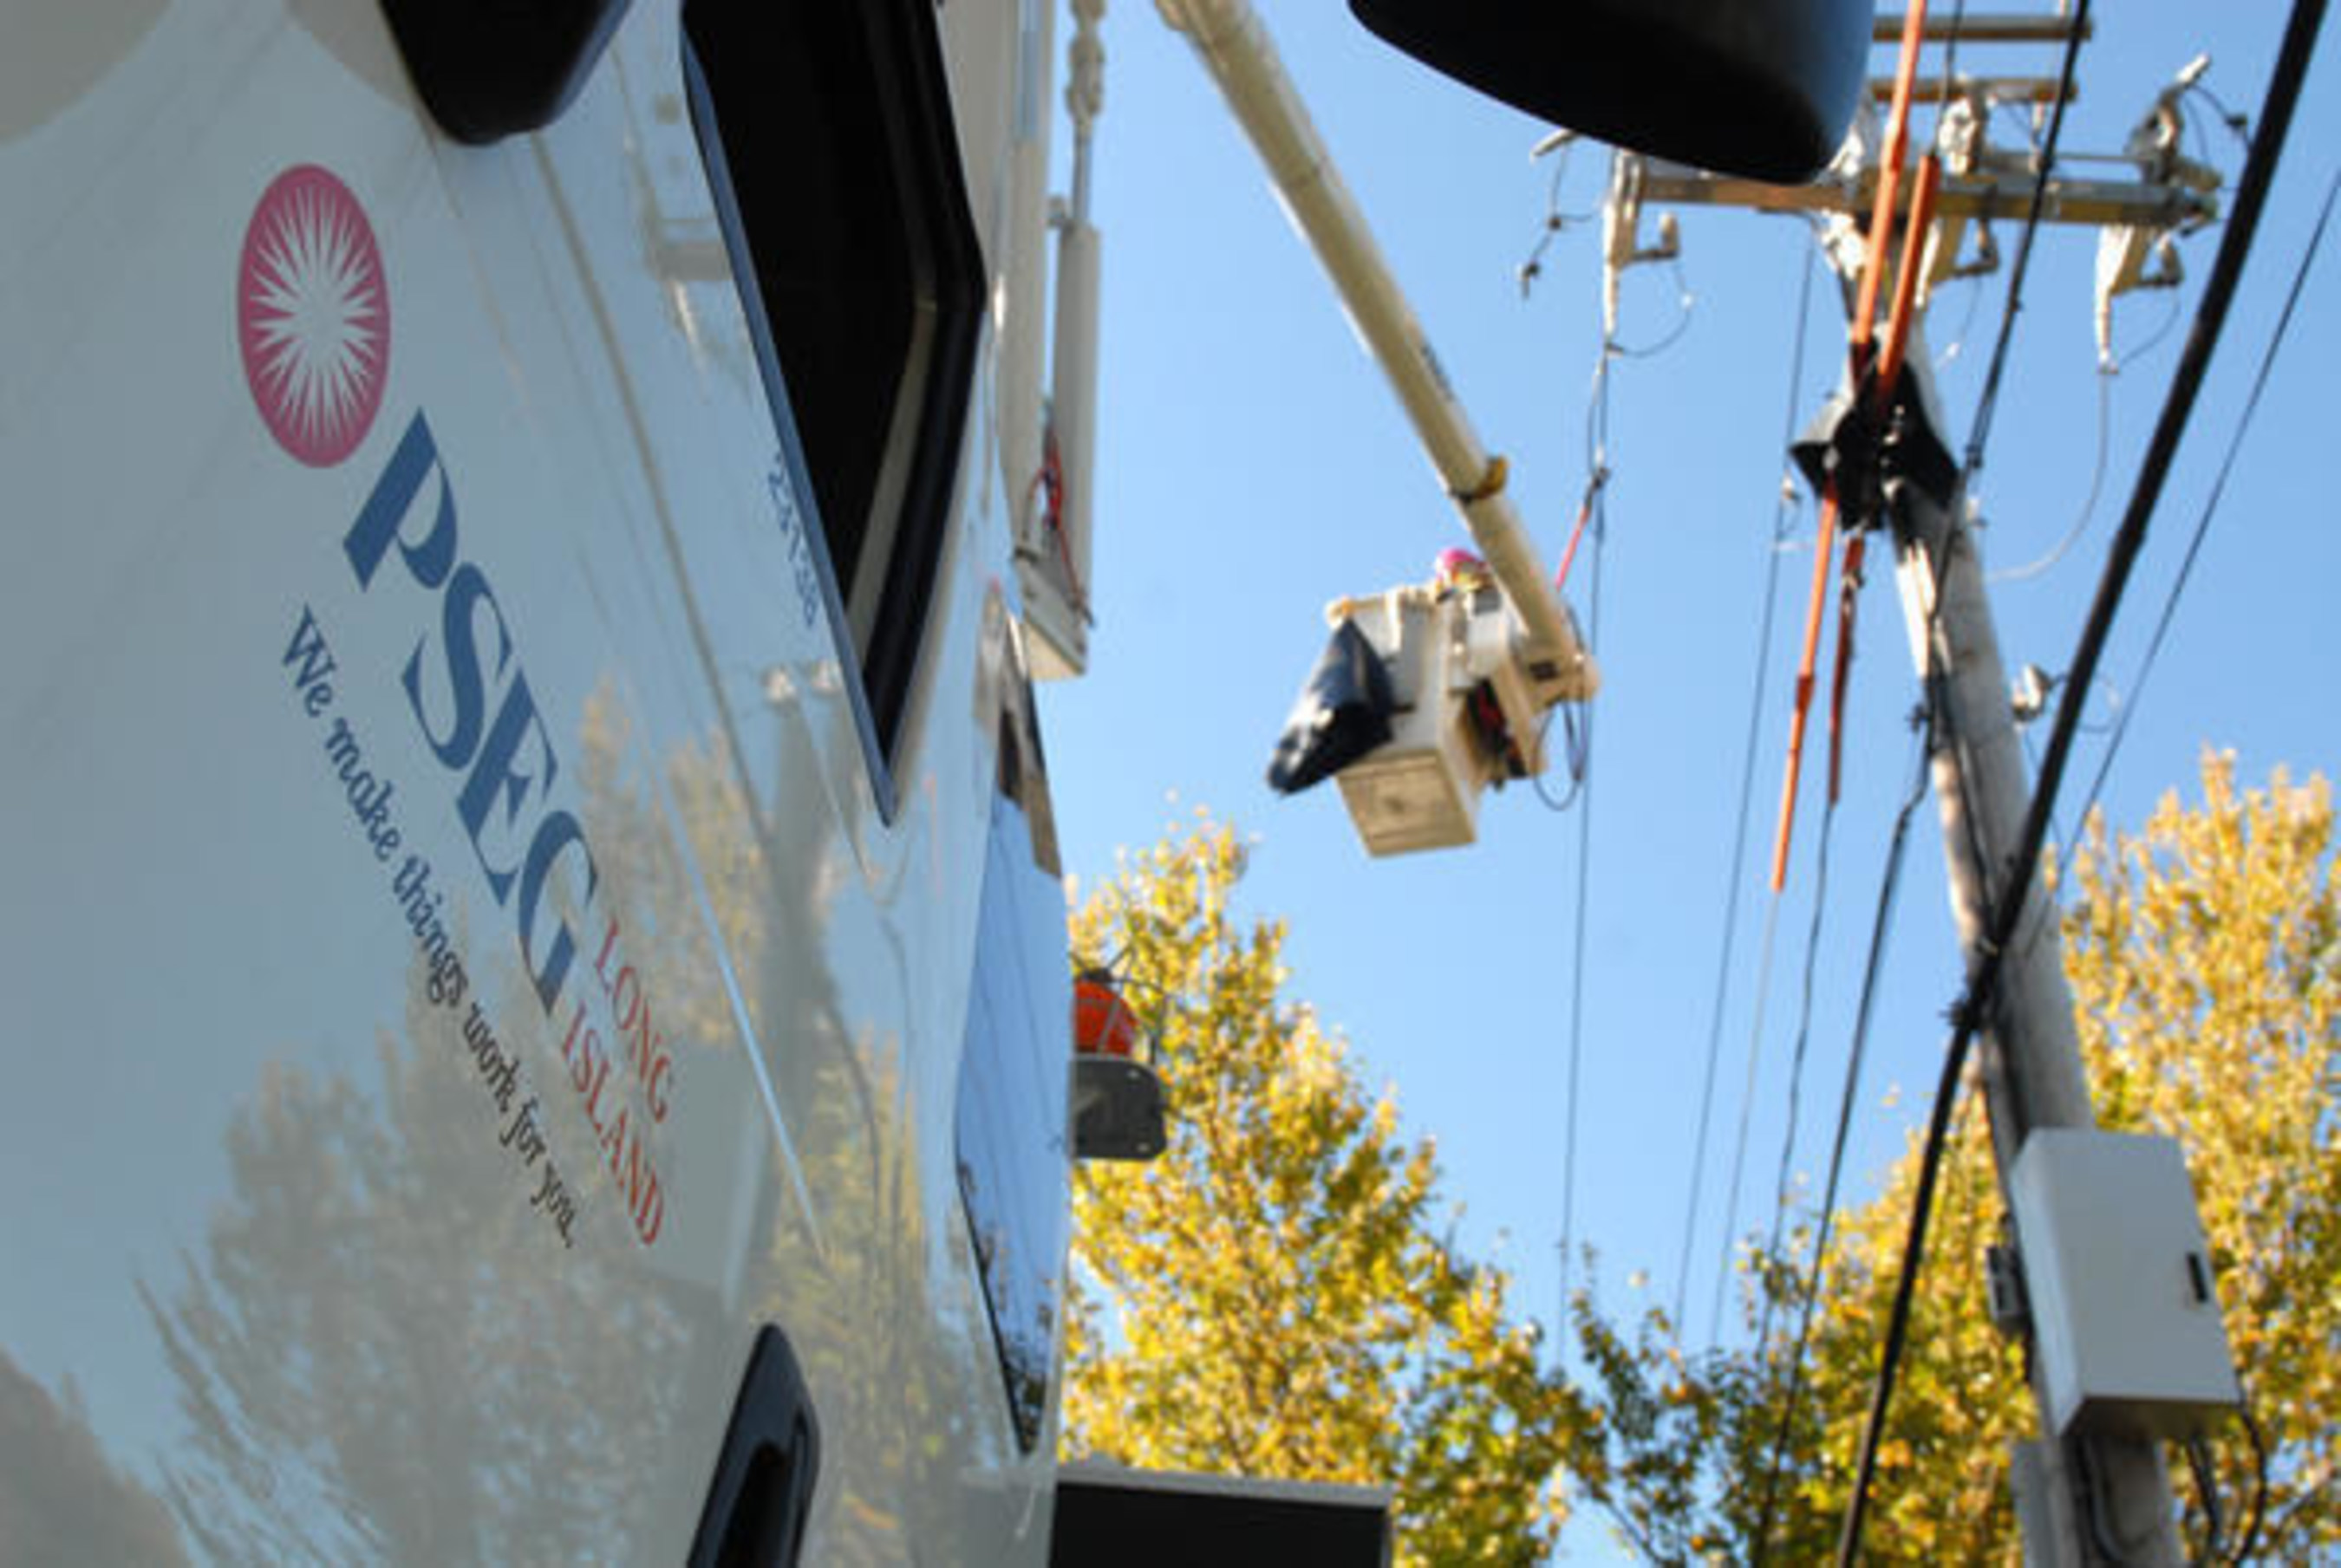 PSEG Long Island crews upgrade the electric system to provide customers with a more resilient electric utility.